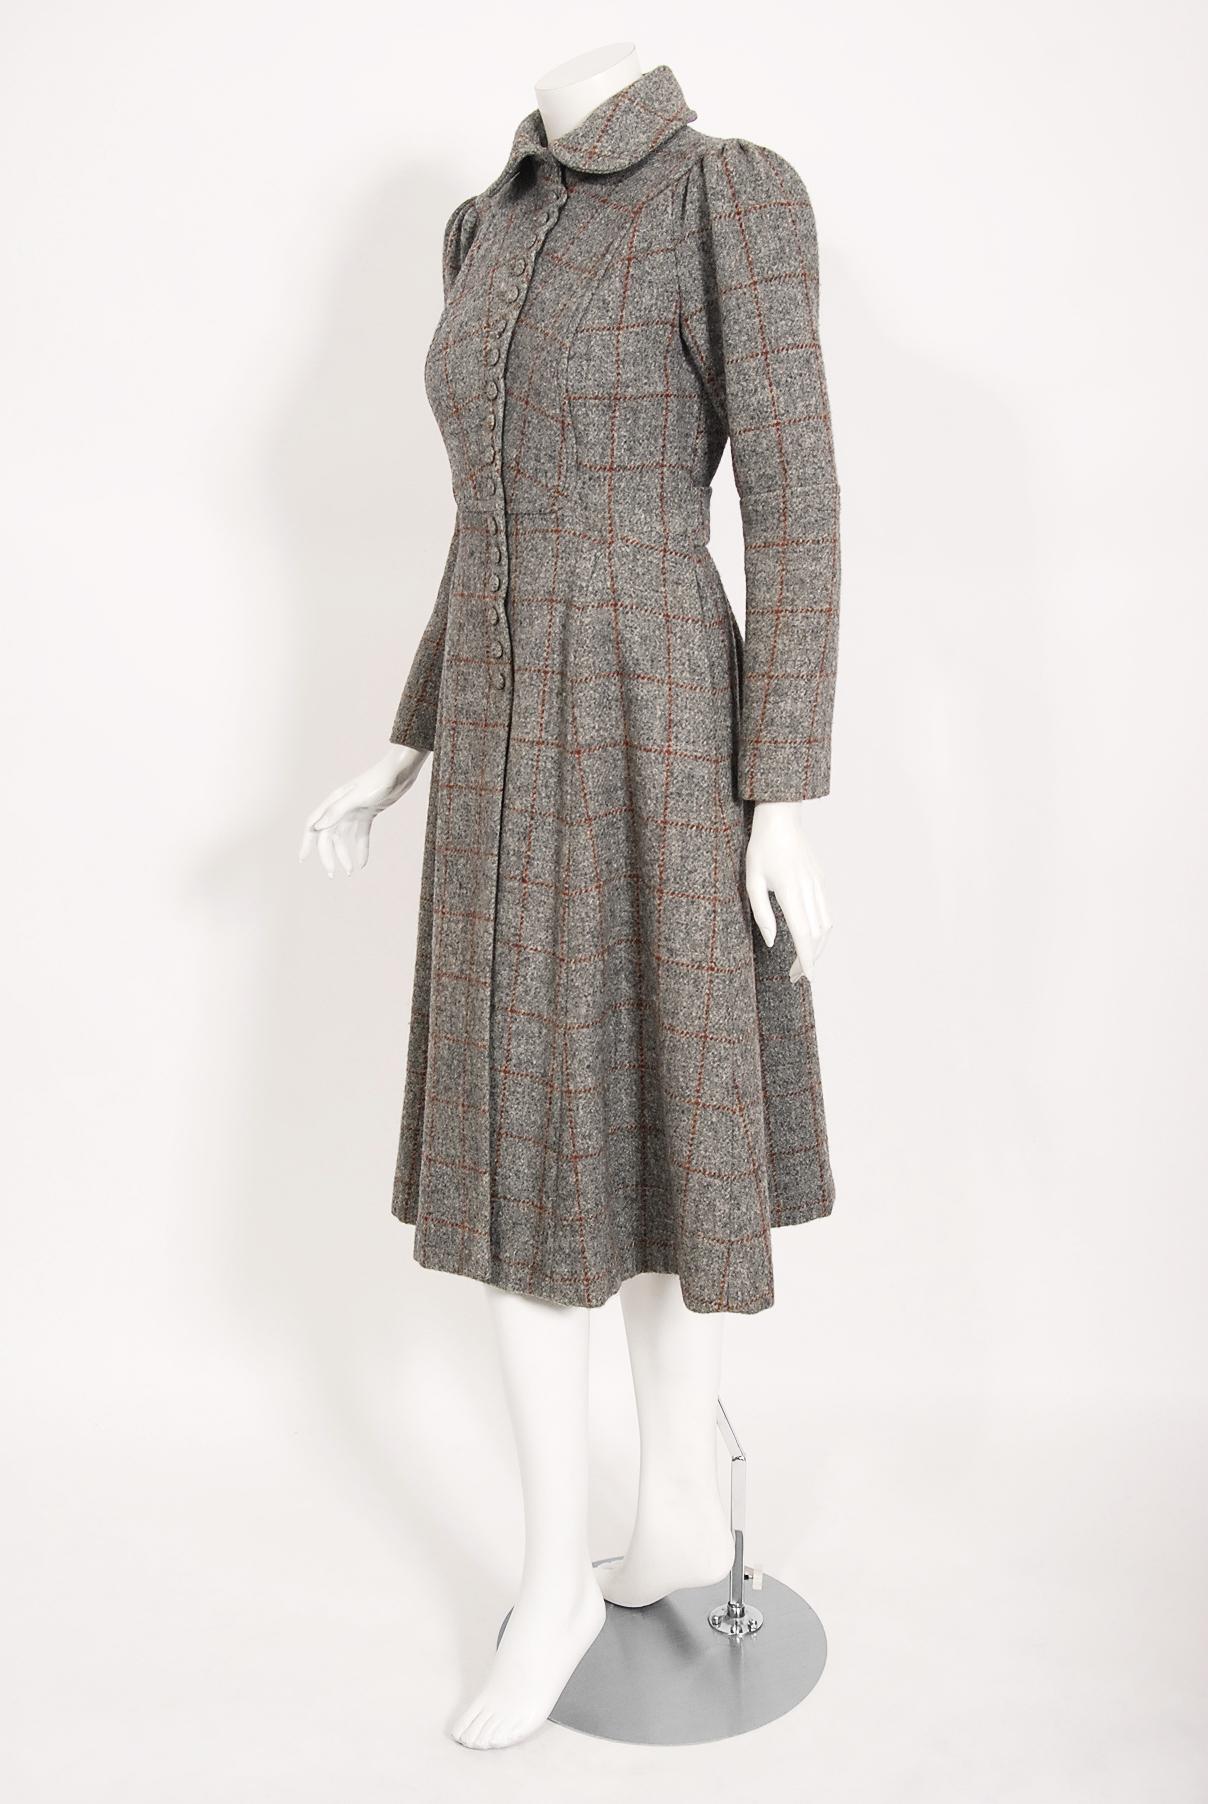 Vintage 1970's Ossie Clark Couture Gray Plaid Wool Pleated Princess Dress Coat 1